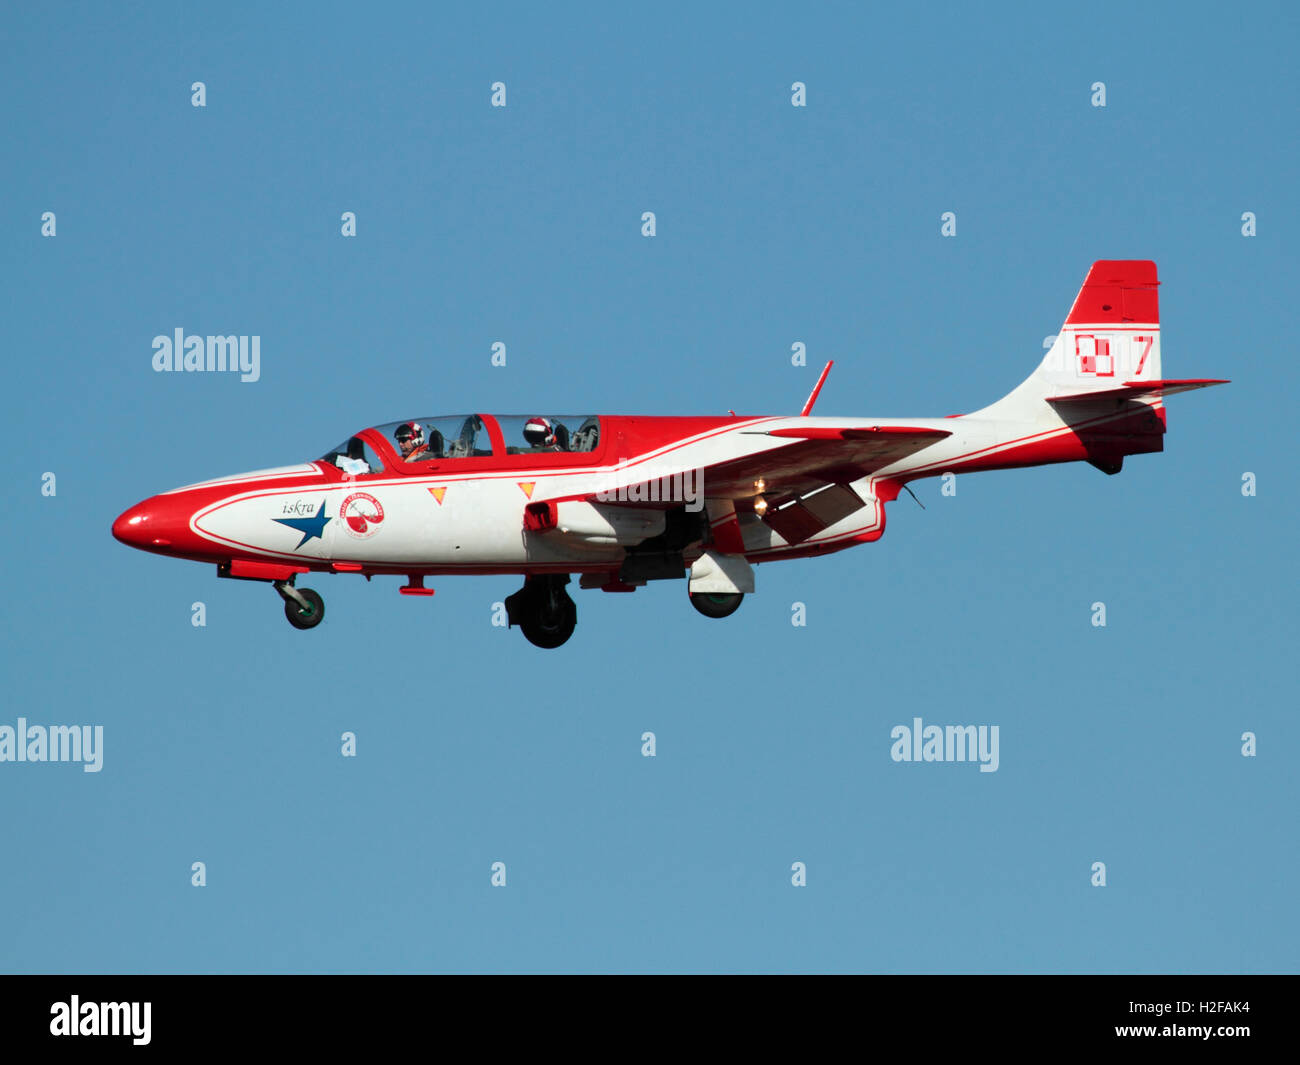 PZL TS-11 Iskra jet trainer aeroplane of the Polish Air Force aerobatic team the Bialo-Czerwone Iskry (White and Red Sparks) Stock Photo